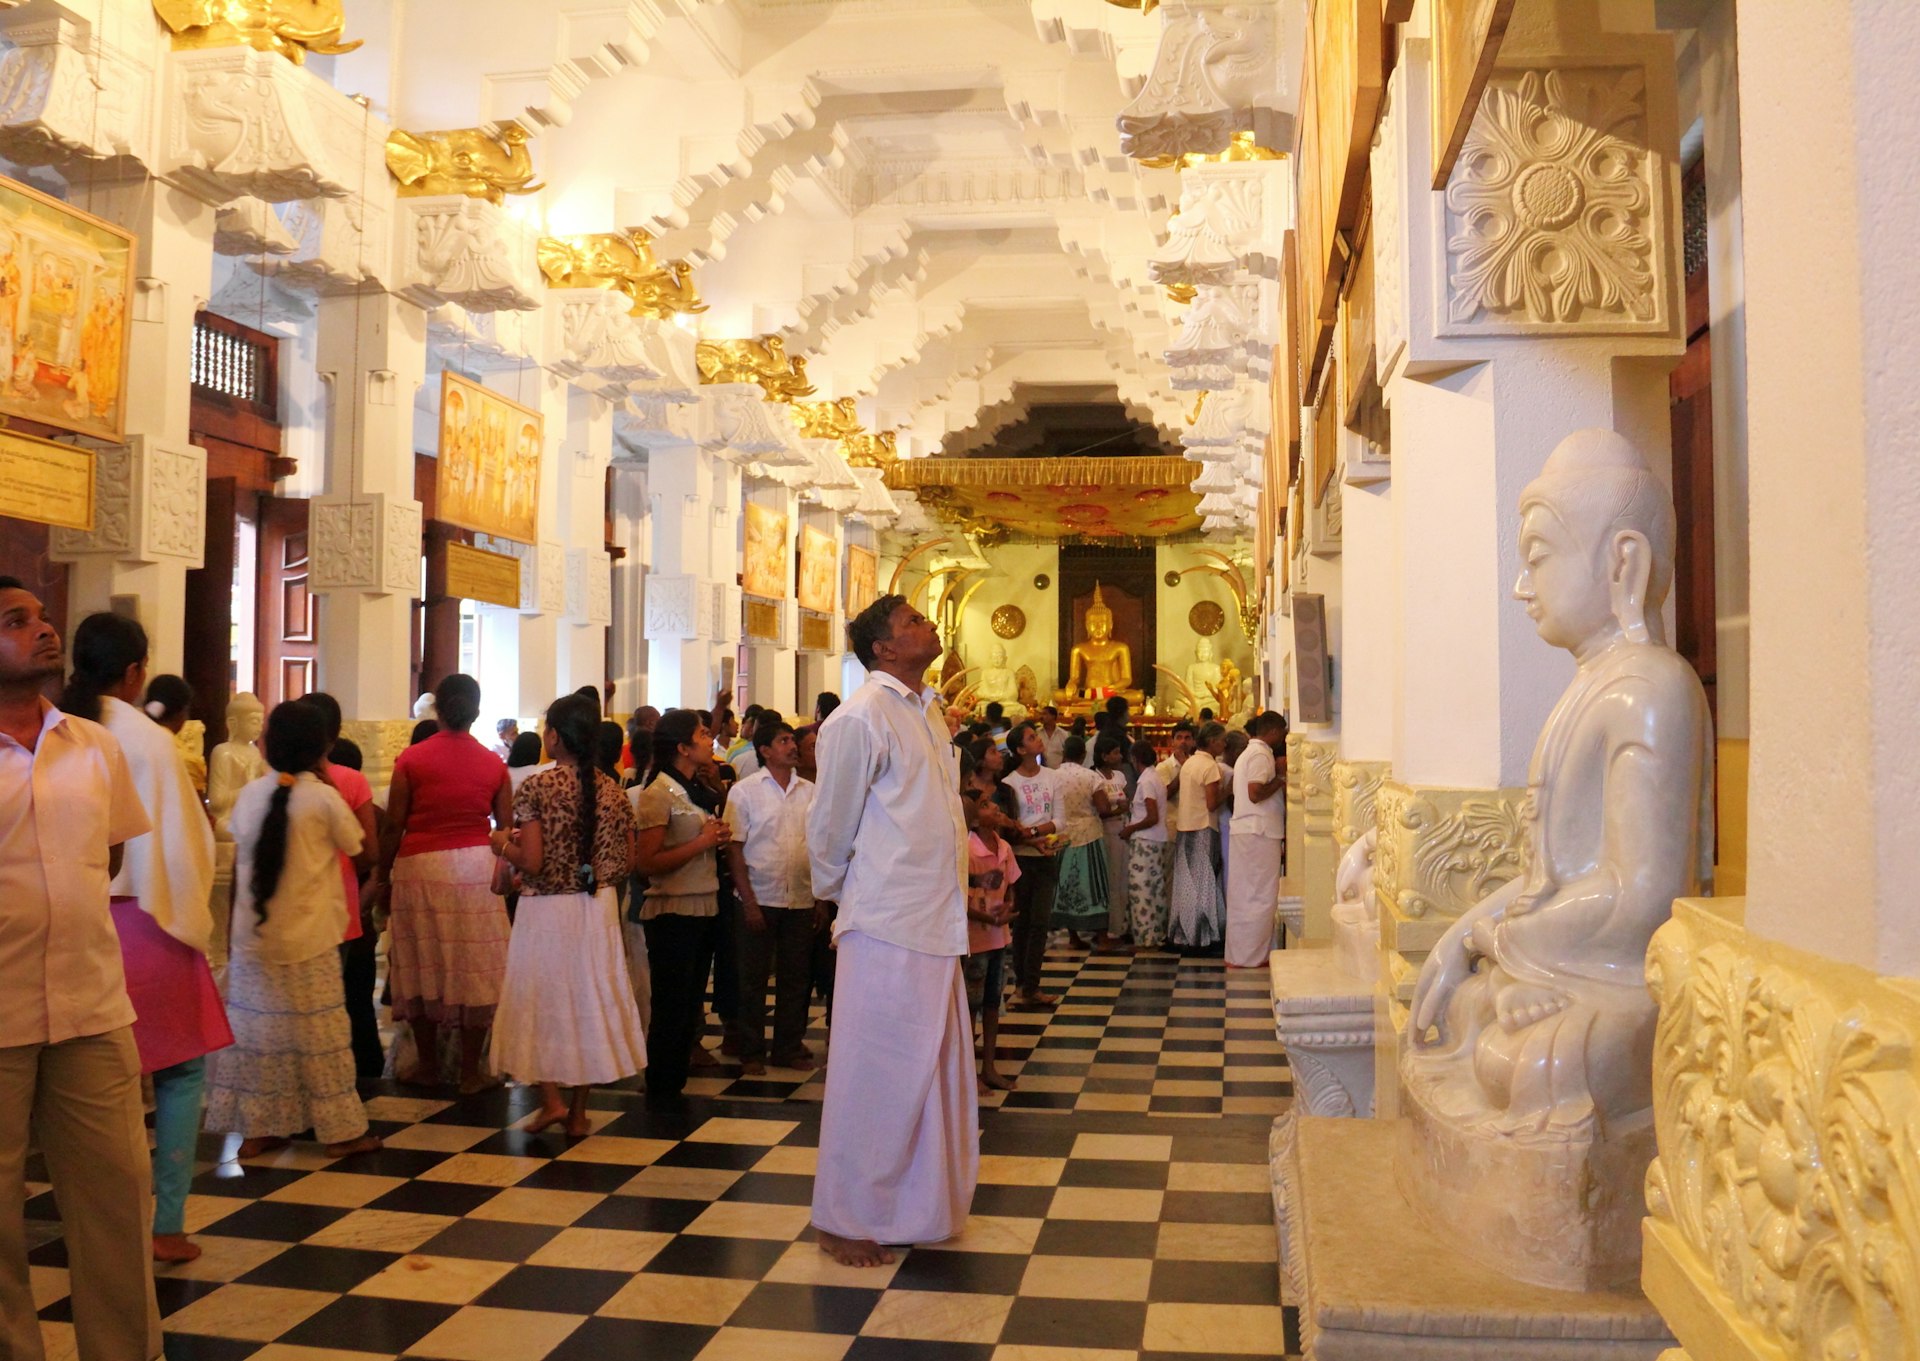 Crowds of people pay respect to the Buddhist relic in Temple of the Buddha Tooth, Kandy, Sri Lanka.